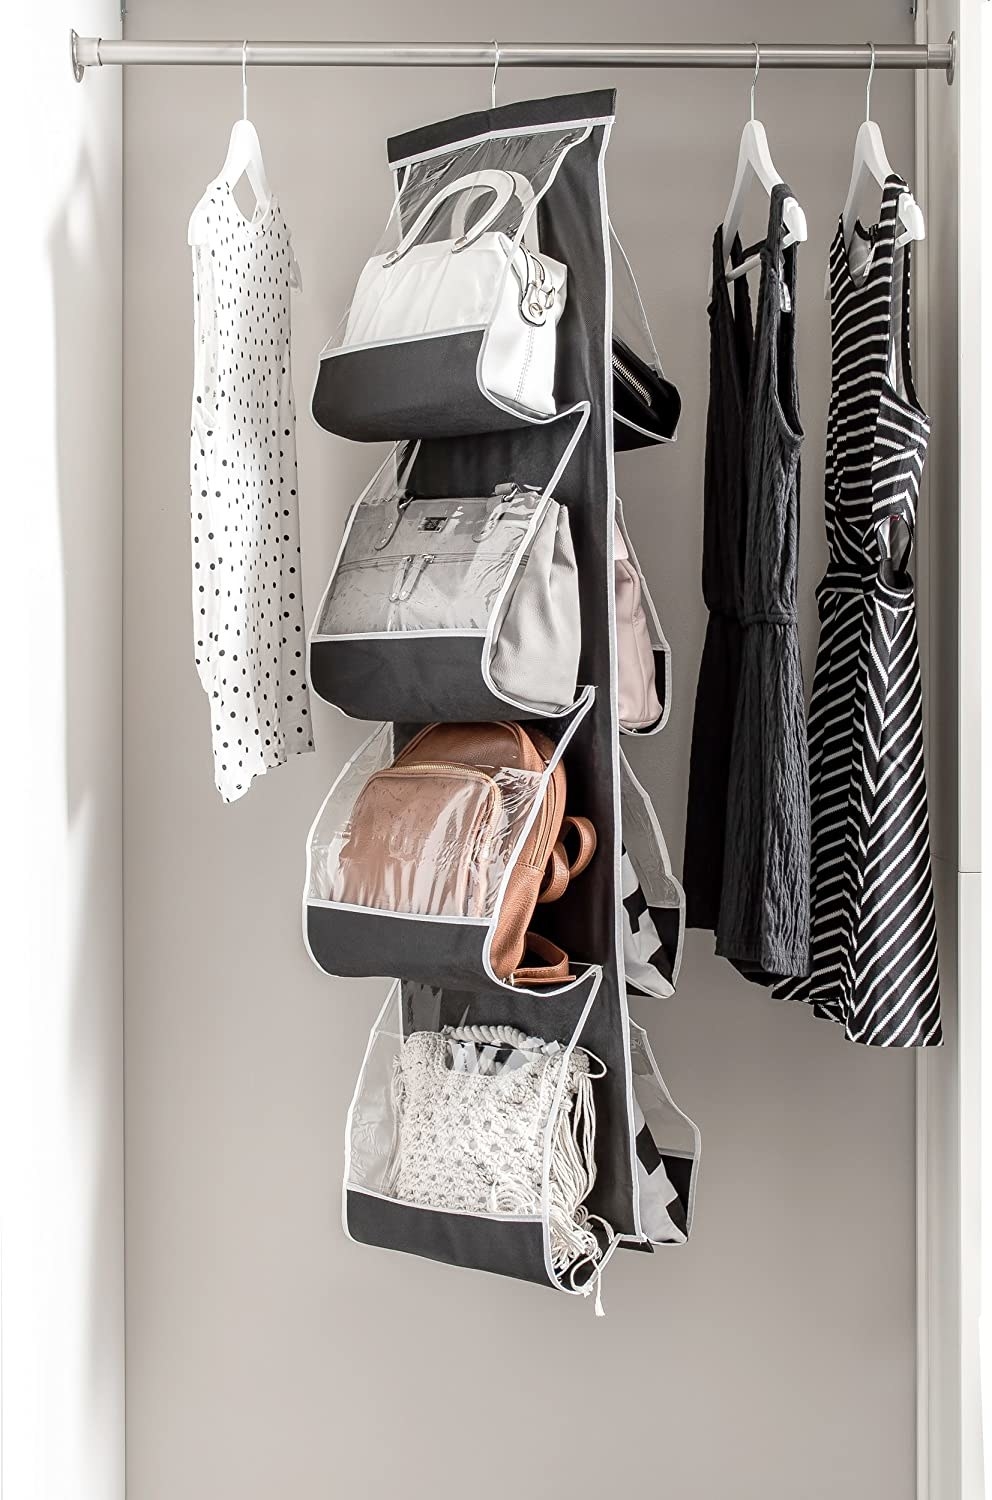 hanging purse organizer hung in closet with different purses inside each pocket